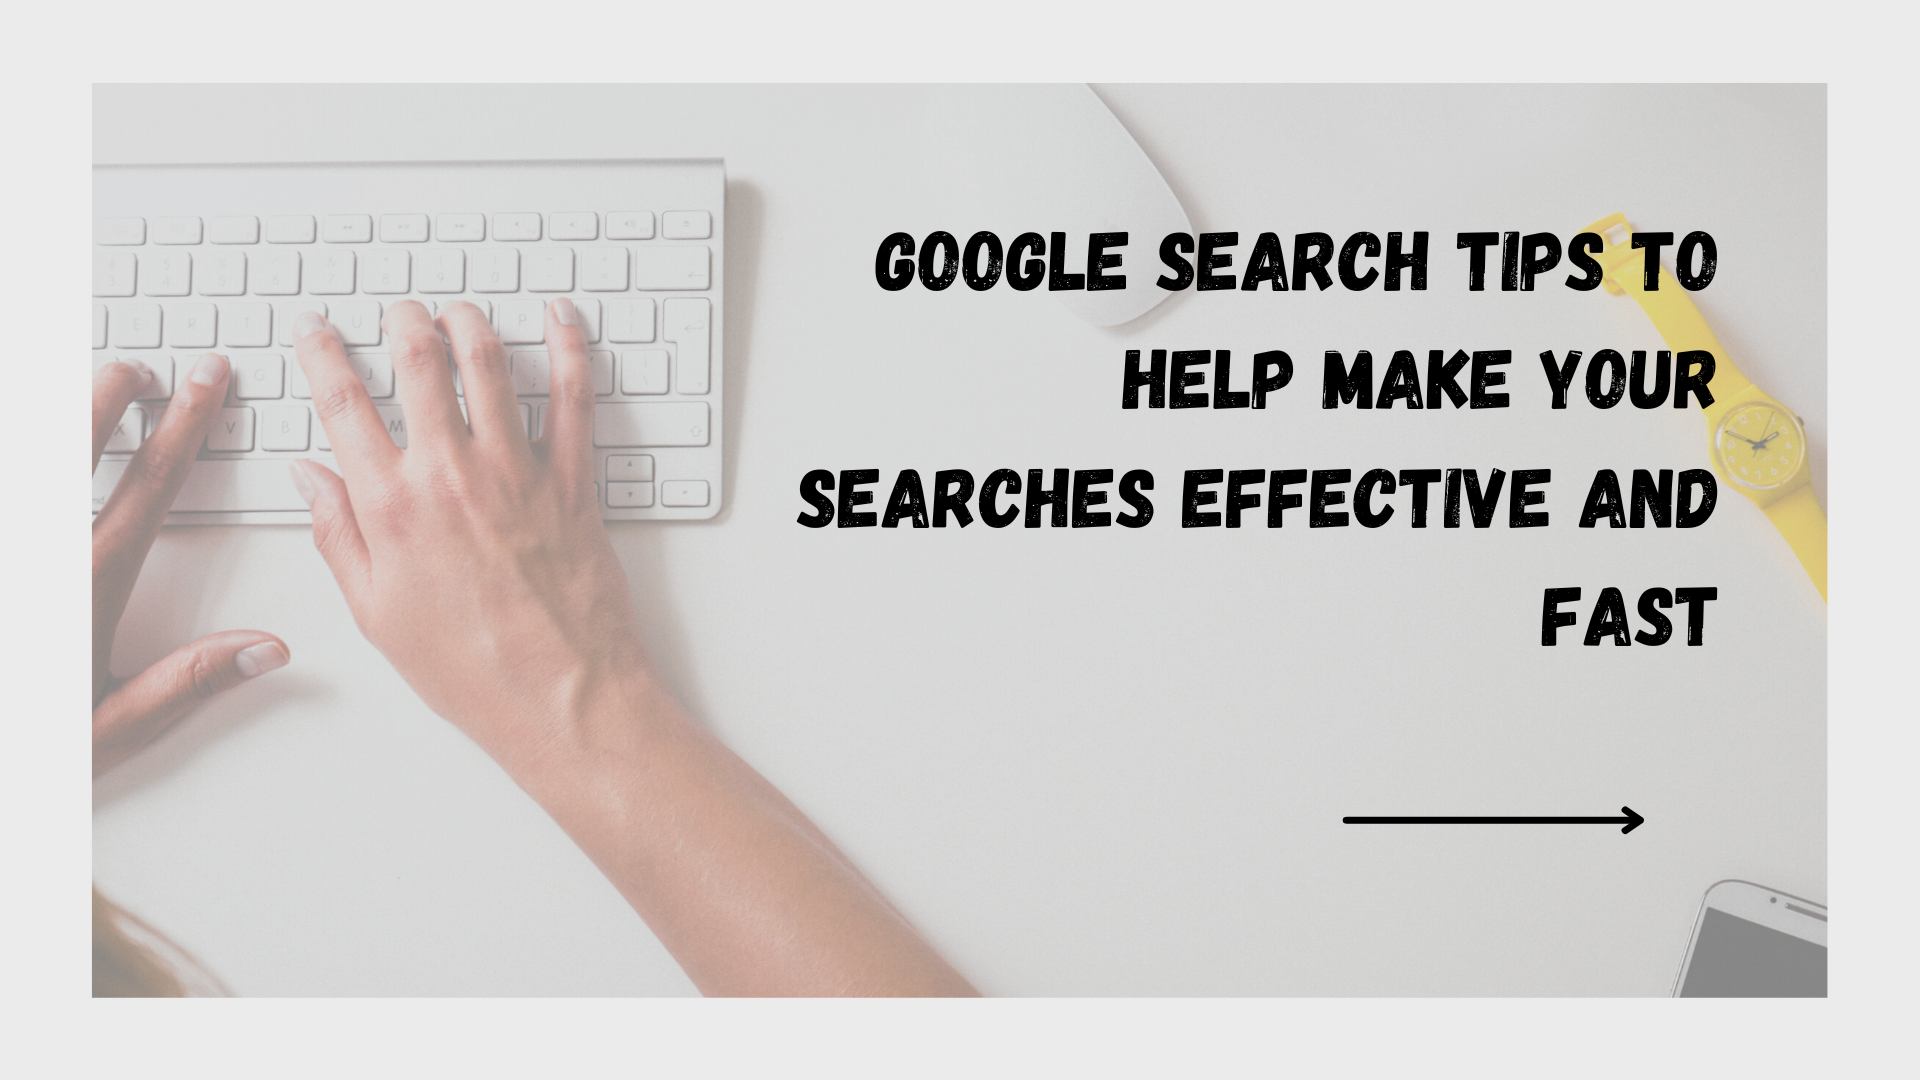 Google Search Tips To Help Make Your Searches Effective And Fast #techtips #googlesearch